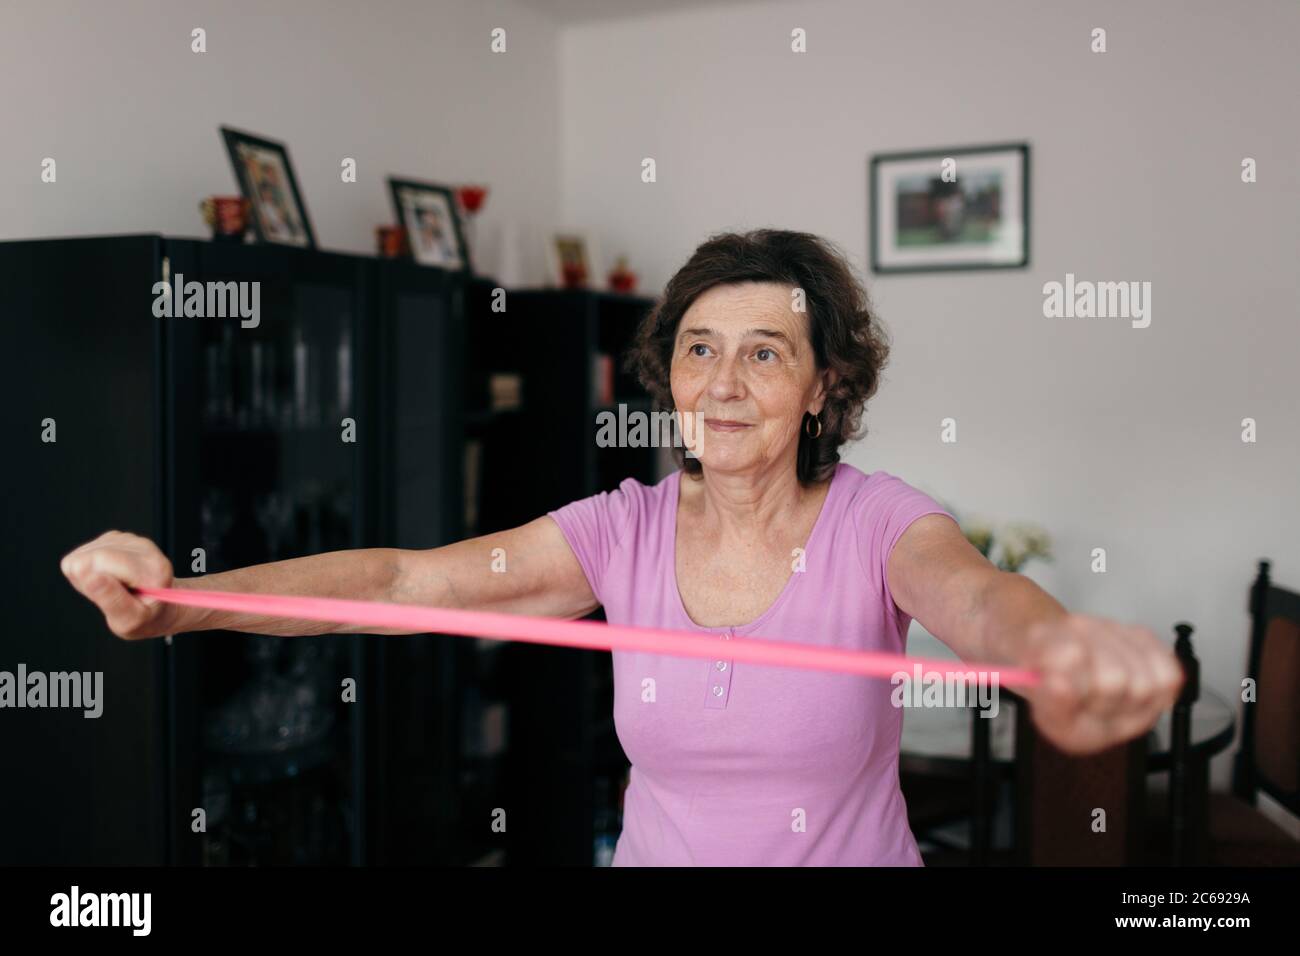 Elderly woman stretching rubber band at home. Waist up shot of 70 years old woman in purple t-shirt exercising arms with pink rubber band in living ro Stock Photo